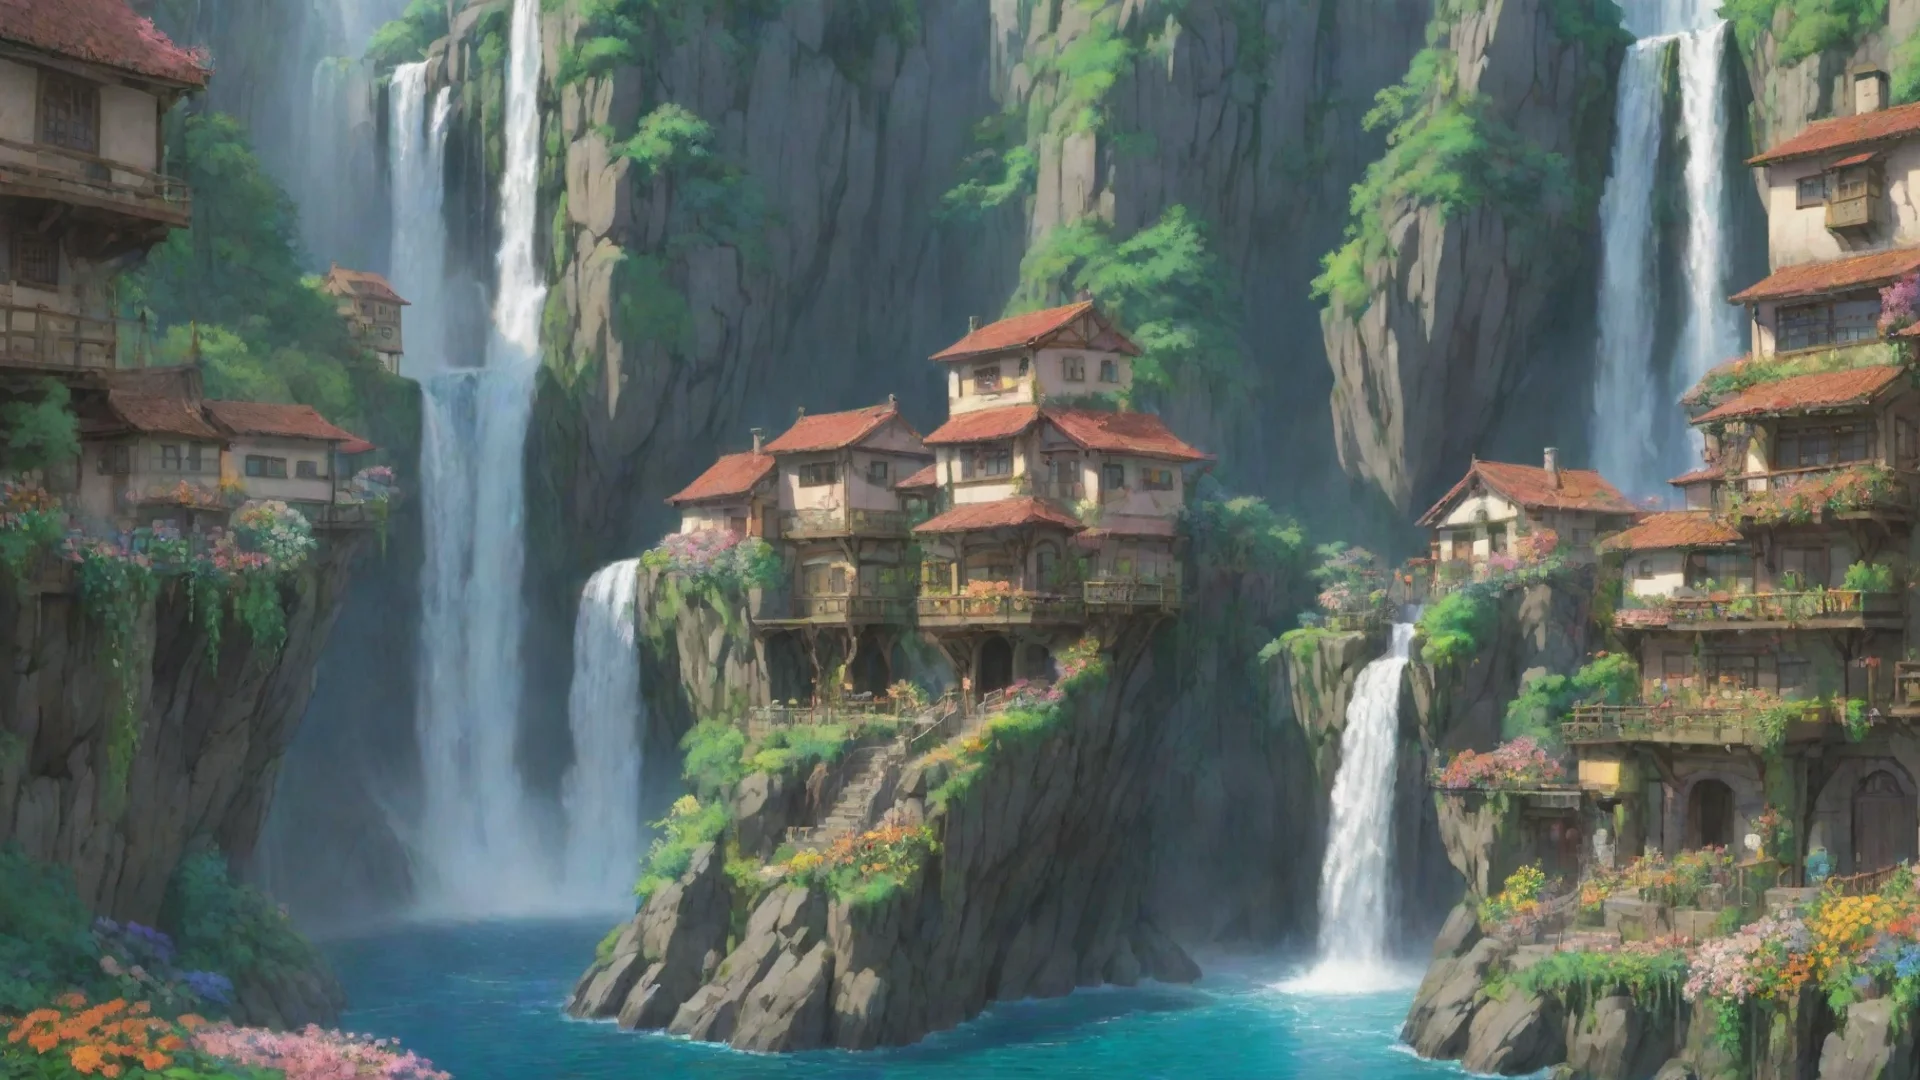 studio ghibli best award winning art environment sheer overhang cliff water fall city cute town with flowers hanging plants wide